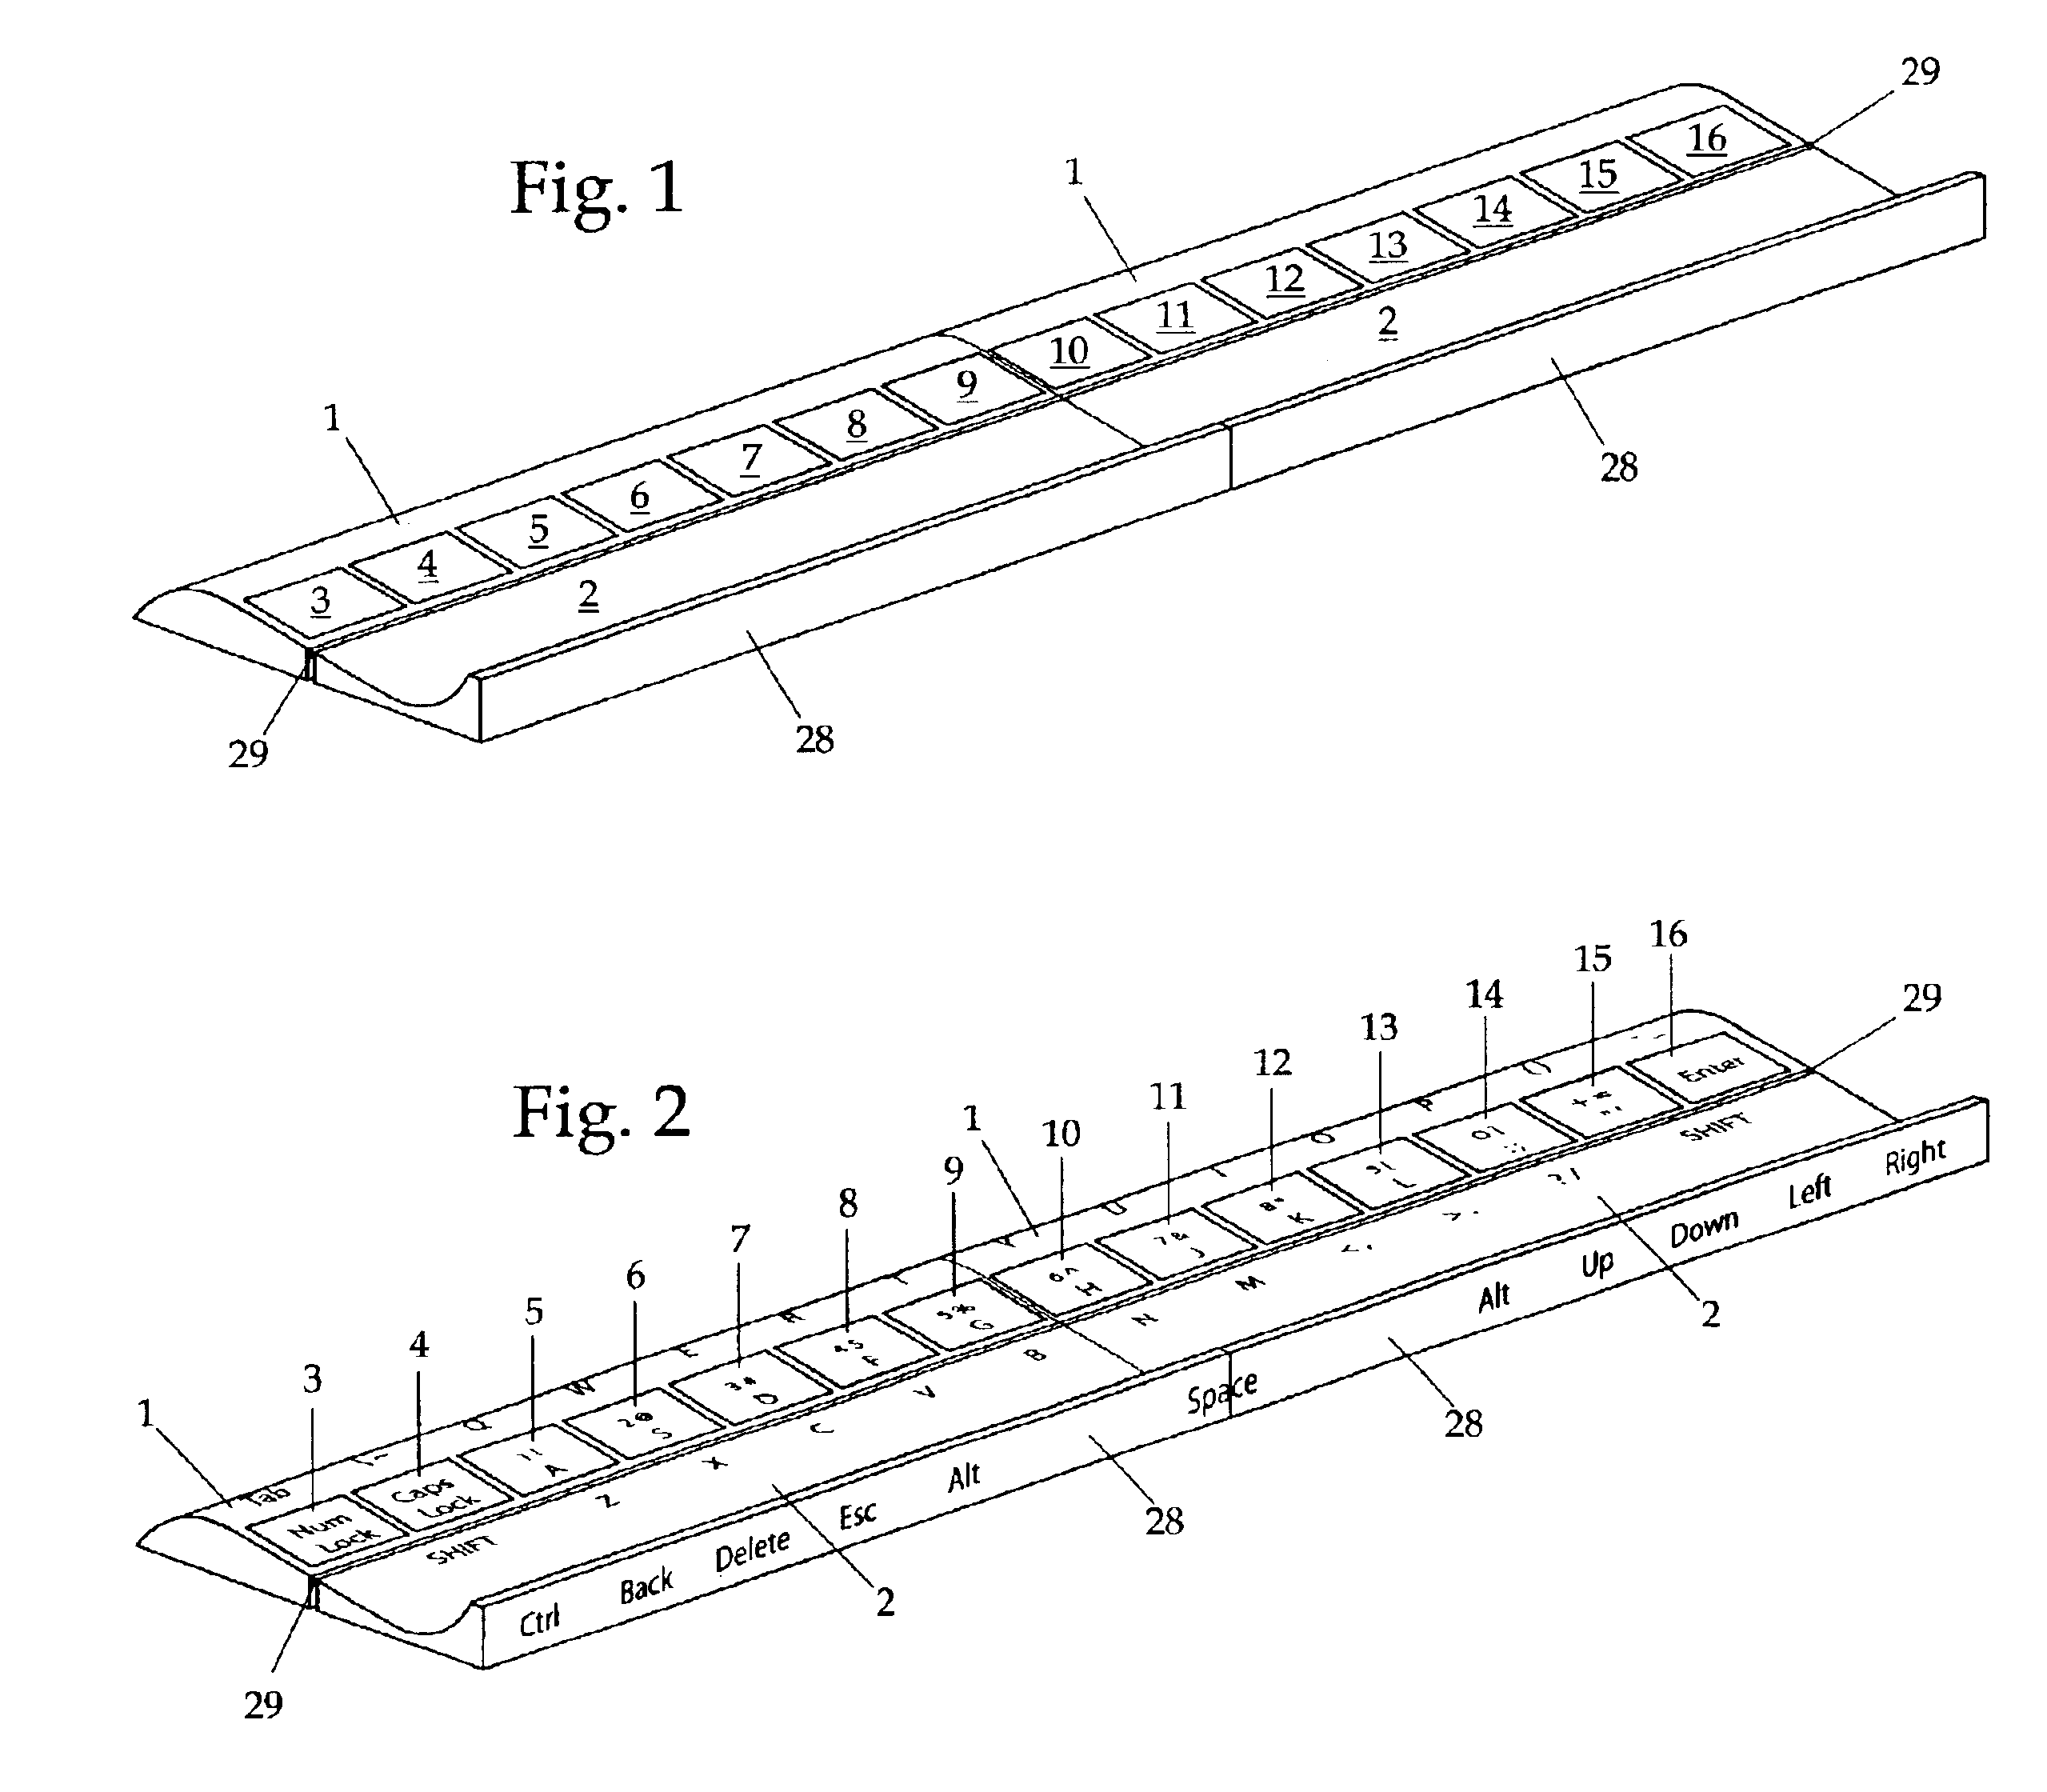 Compact keyboard with sliding motion key actuation